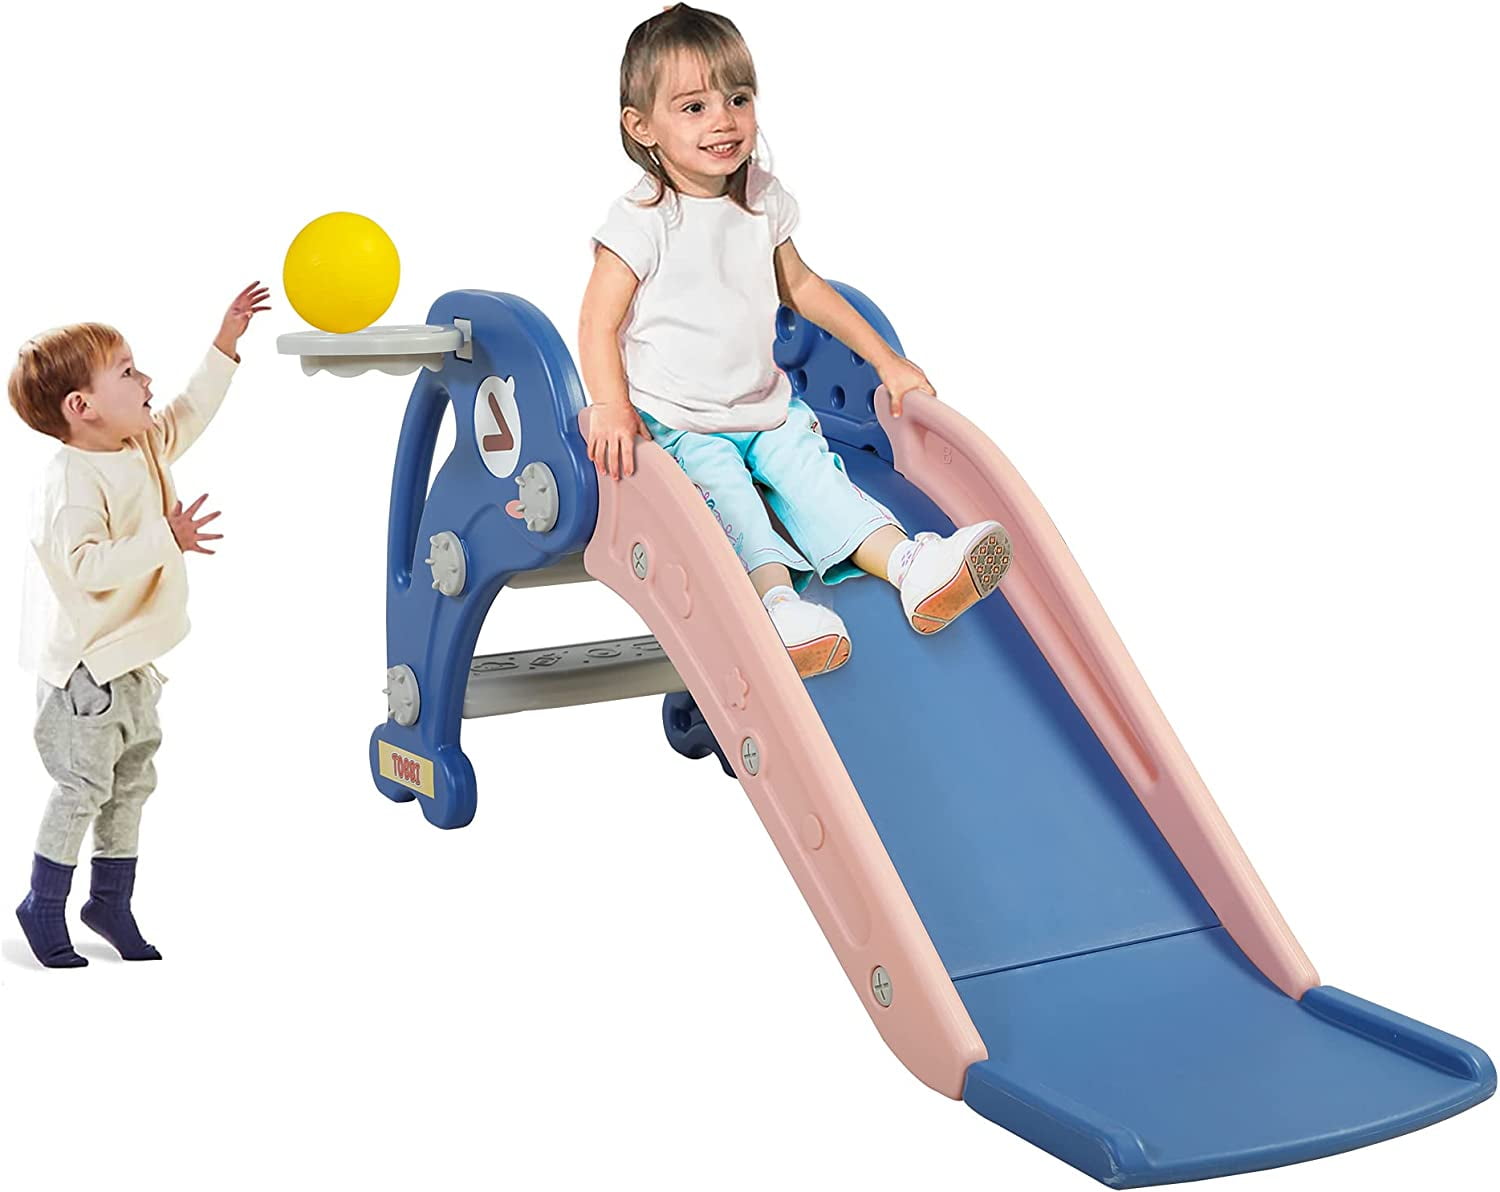 Details about   Toddler Slide Climber In/Outdoor Kids Playground Toy Play w/ Basketball Hoop US 